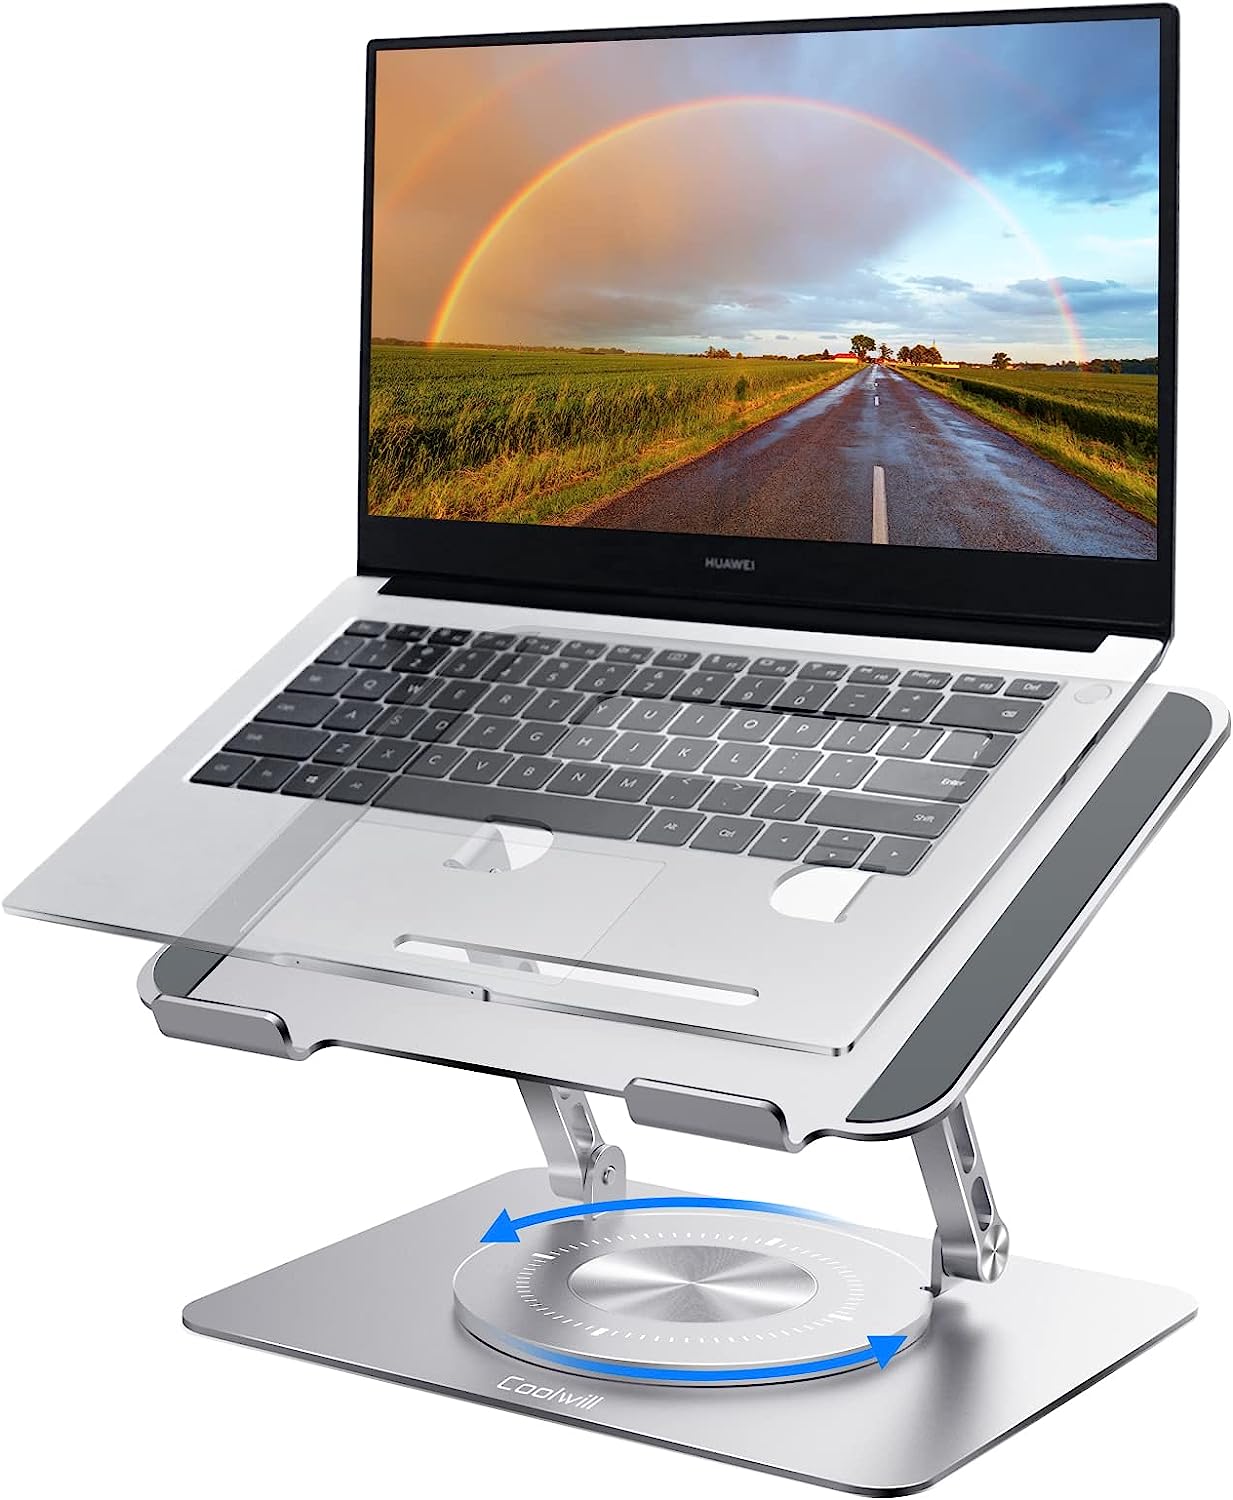 Coolwill Laptop Stand 360° Rotating, Foldable Aluminum Laptop Desk Stand, Adjustable Height Laptop Riser, Ergonomic Computer Monitor Stand, Compatible with PC, MacBook Air/All 10-16\\\" Laptops